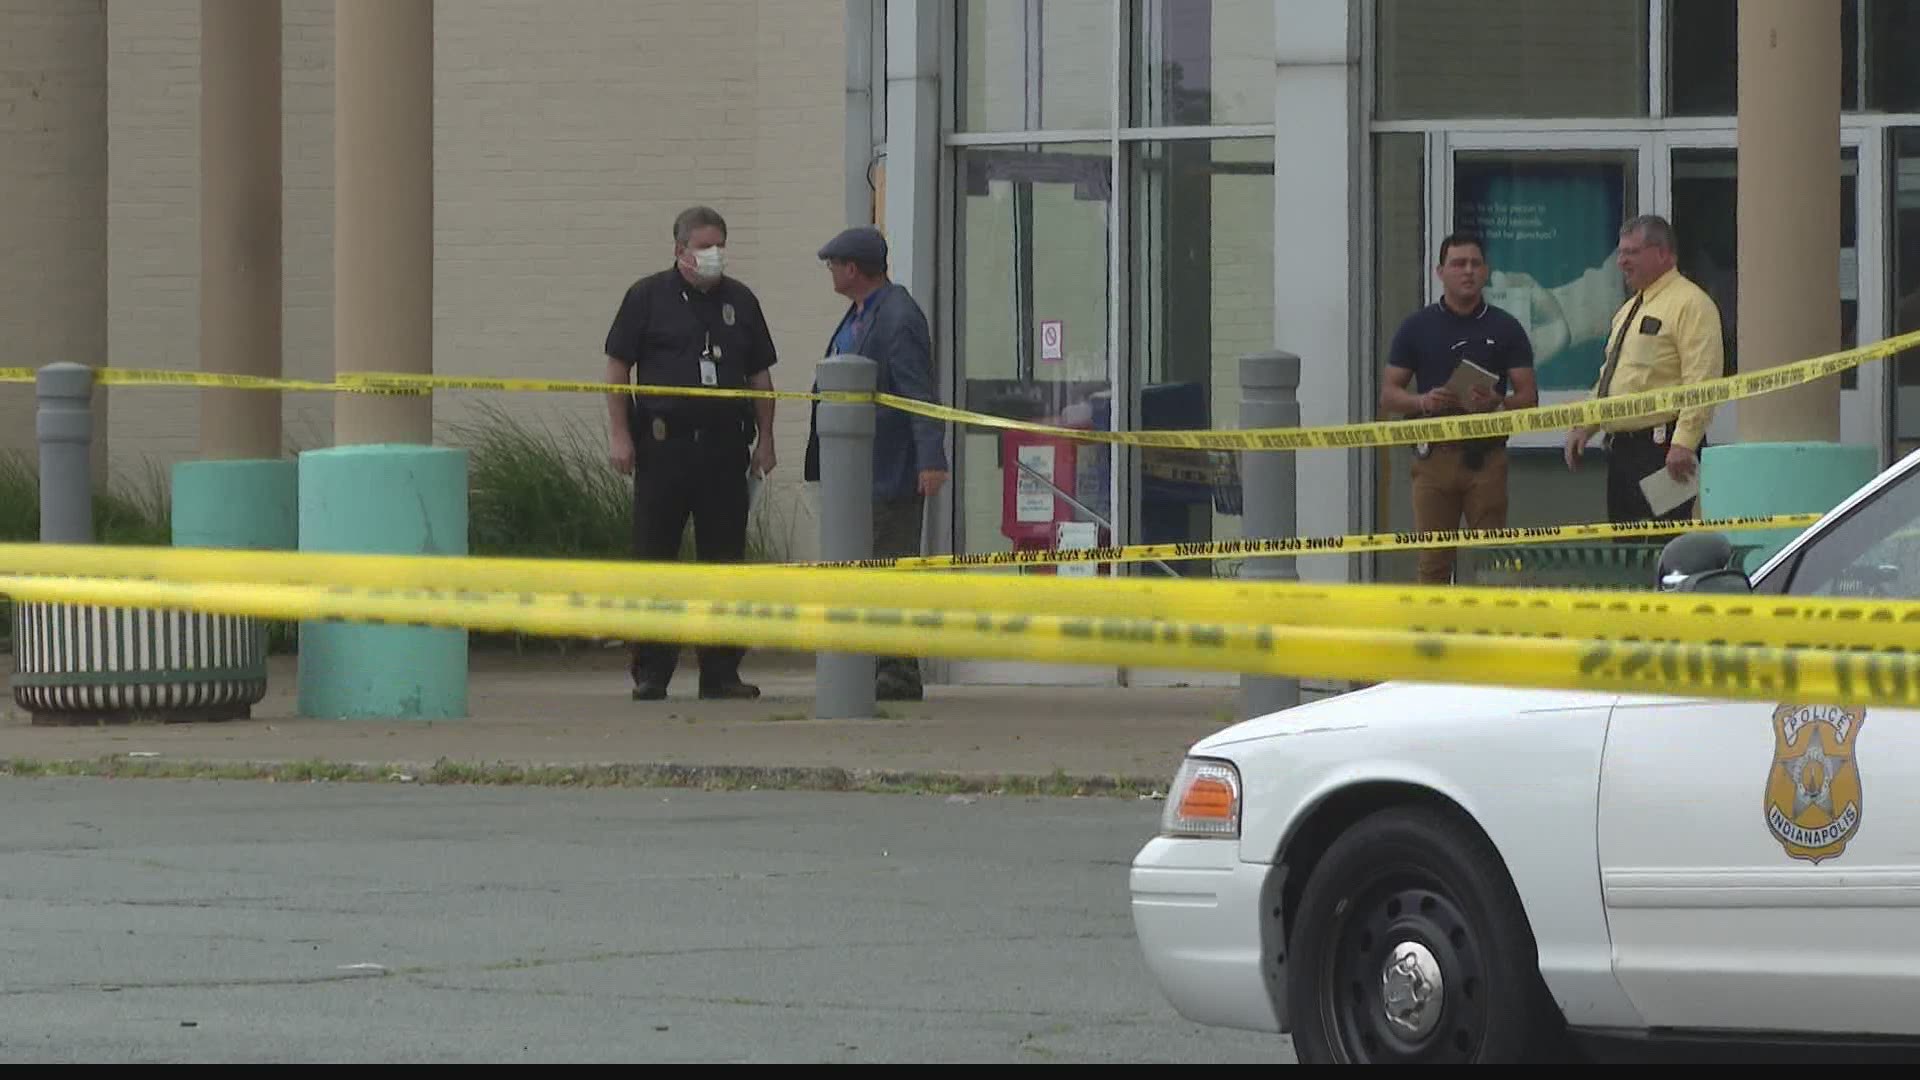 One person was taken to the hospital with serious injuries after a shooting at Lafayette Square Mall.